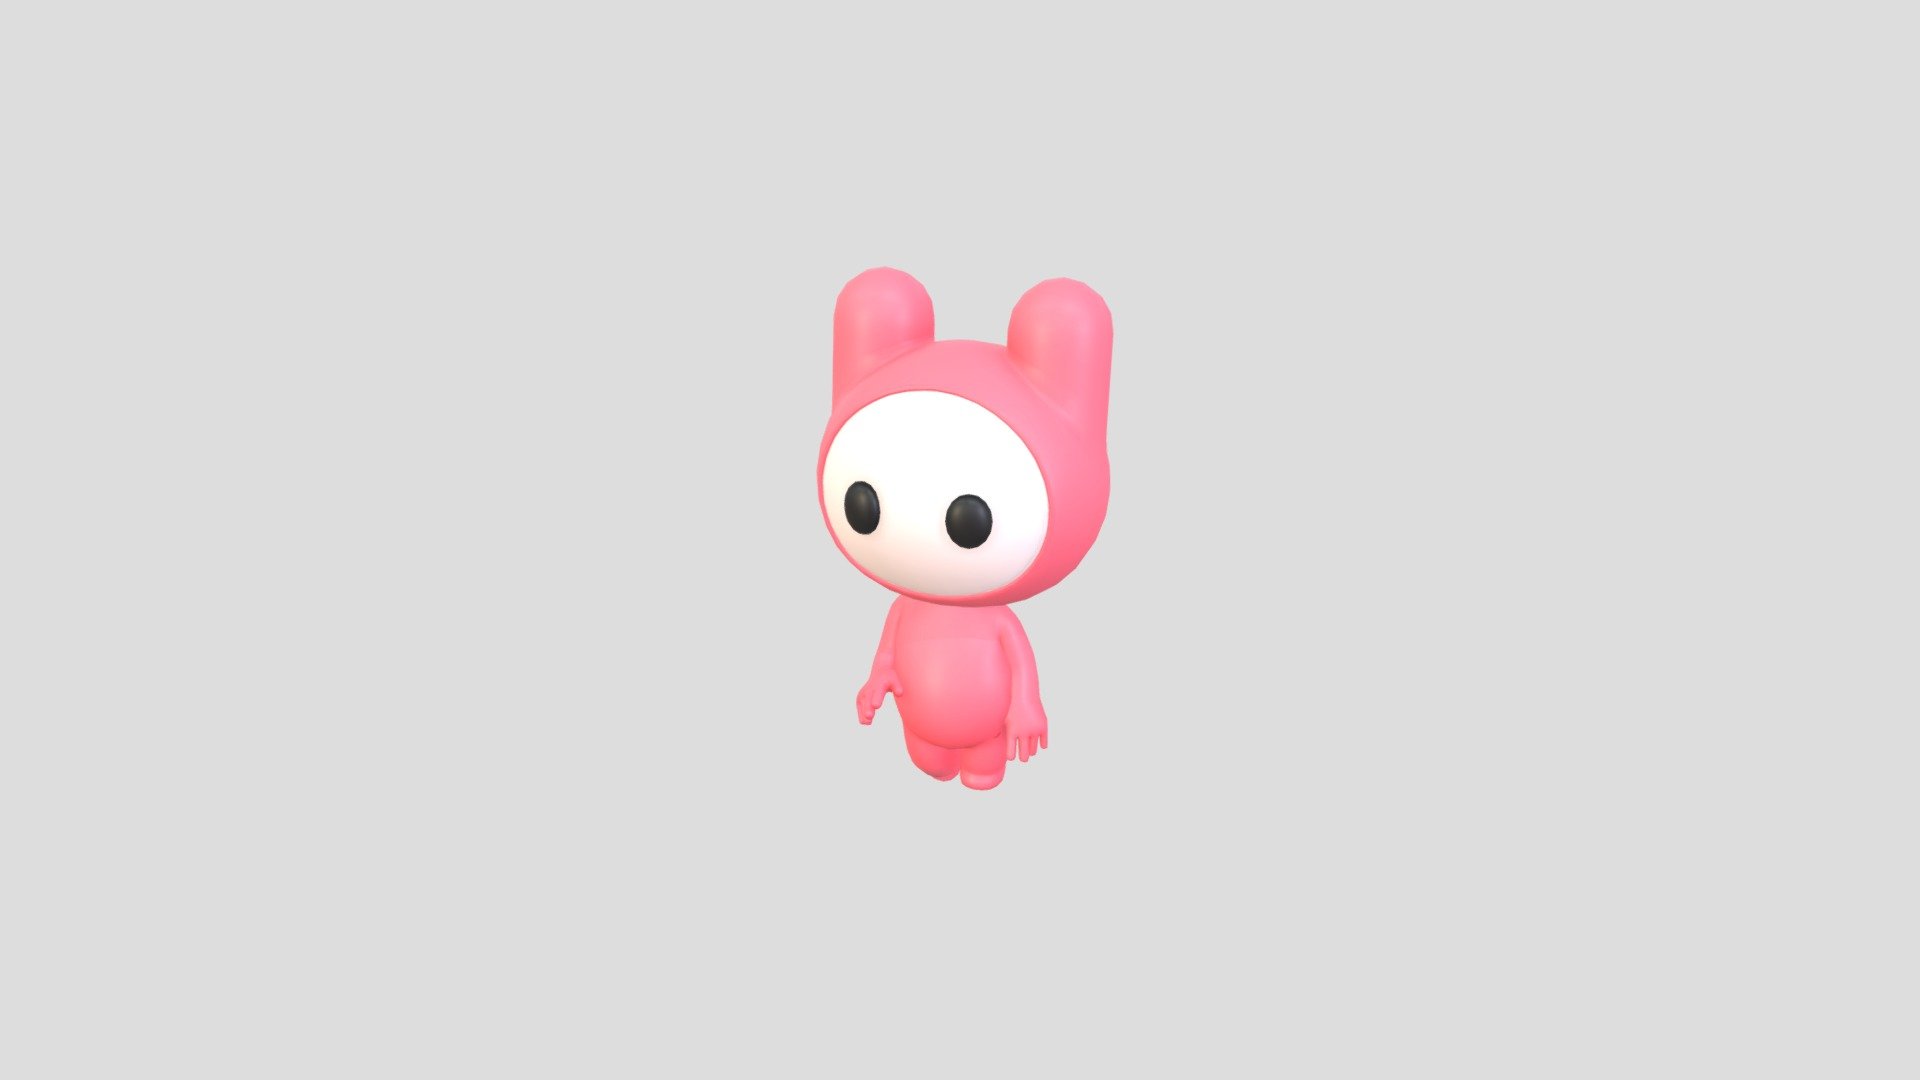 Rigged Mascot Character 3d model.      
    


File Format      
 
- 3ds max 2021  
 
- FBX  
 
- OBJ  
    


Clean topology    

Rig with CAT in 3ds Max                          

Bone and Weight skin are in fbx file                 

No Facial Rig               

No Animation               

Non-overlapping unwrapped UVs        
 


PNG texture               

2048x2048                


- Base Color                        

- Roughness                         



3,452 polygons                          

3,316 vertexs                          
 - Character178 Rigged Mascot - Buy Royalty Free 3D model by BaluCG 3d model